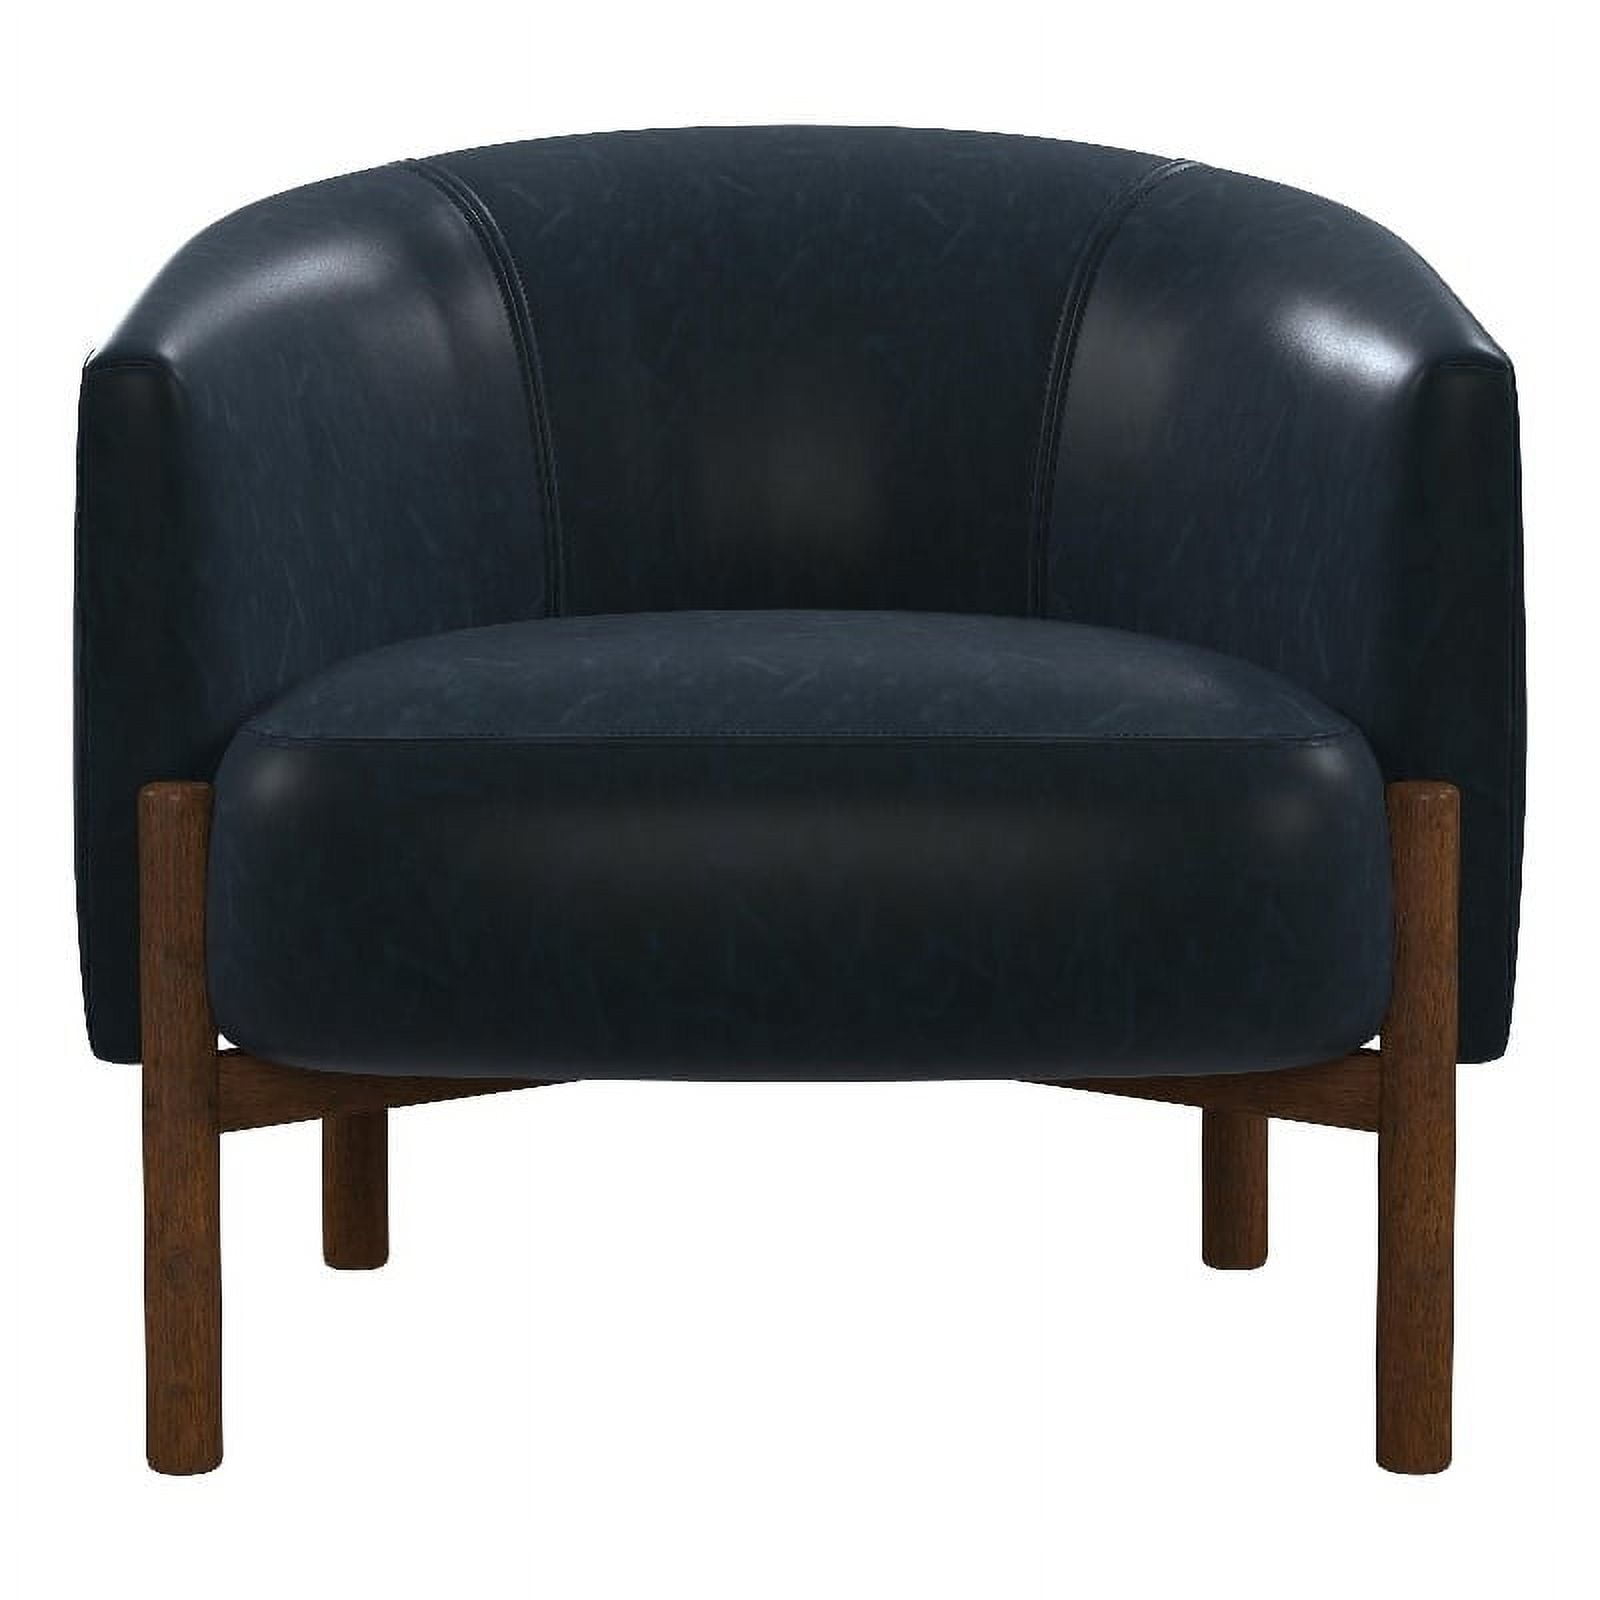 Higgins Navy Blue Accent Chair with Wood Frame - Walmart.com